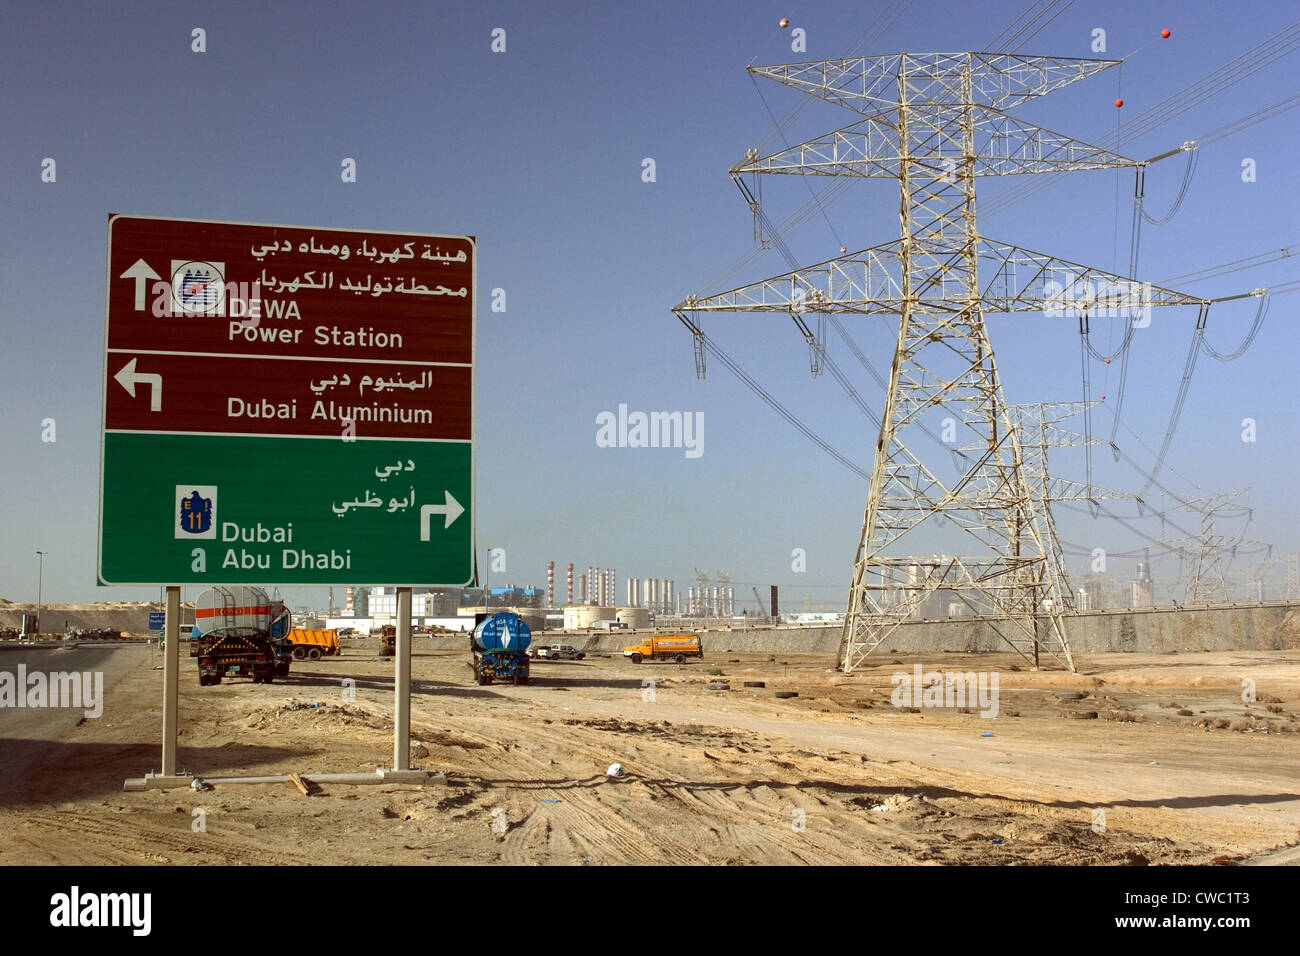 Dubai, utility poles and signs in the desert Stock Photo